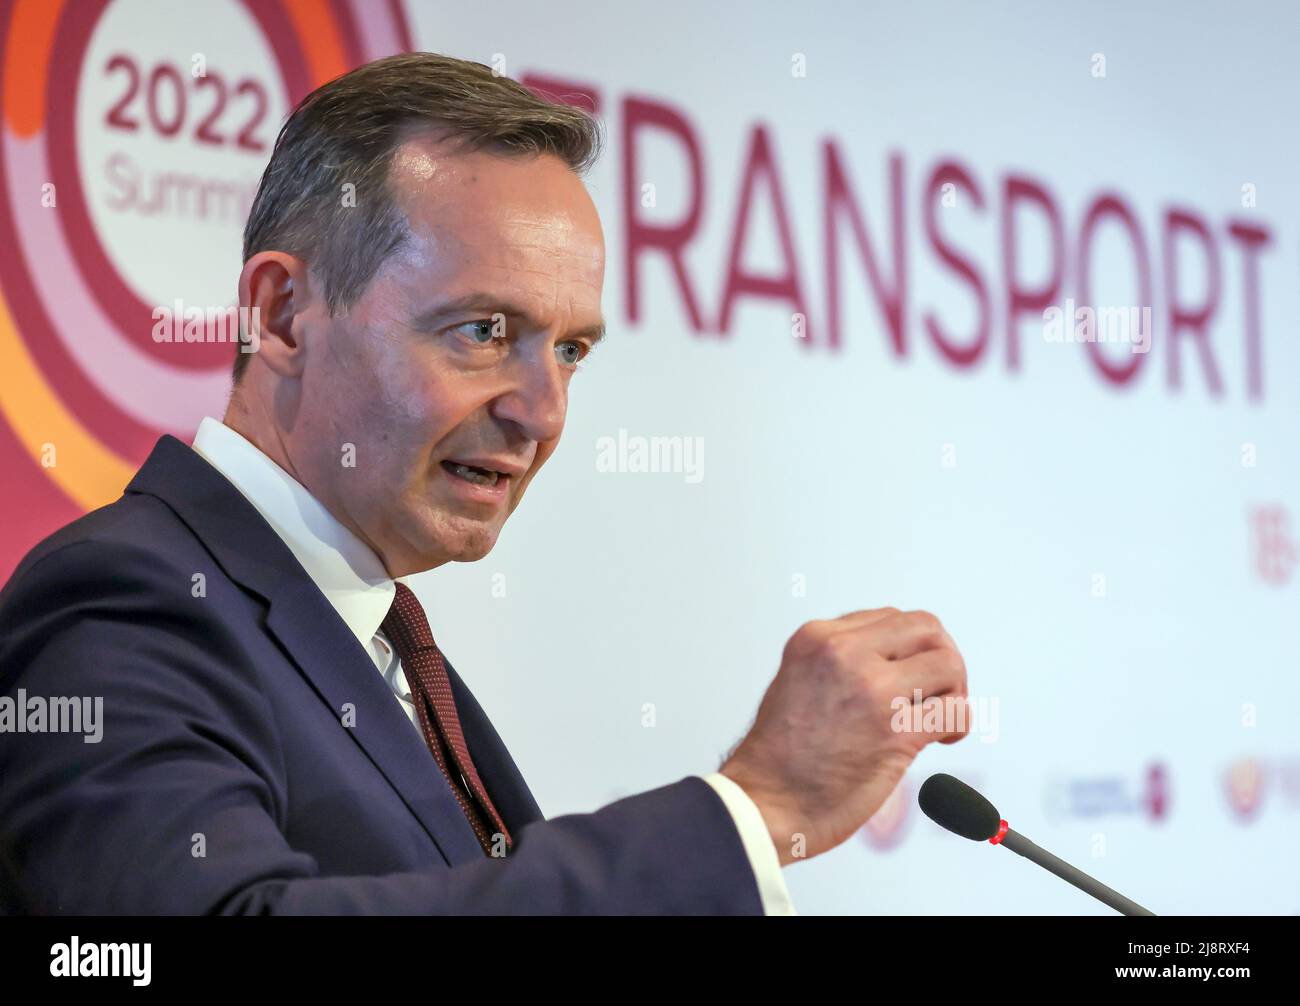 Leipzig, Germany. 18th May, 2022. Volker Wissing (FDP), Federal Minister of Transport, speaks at the International Transport Forum. Some 600 experts are expected to attend the three-day International Transport Forum, including numerous transport ministers from the 63 member states of the OECD's International Transport Forum (ITF). One focus this year should be Ukraine, with its blocked trade routes and infrastructure destroyed in the war. Credit: Jan Woitas/dpa/Alamy Live News Stock Photo